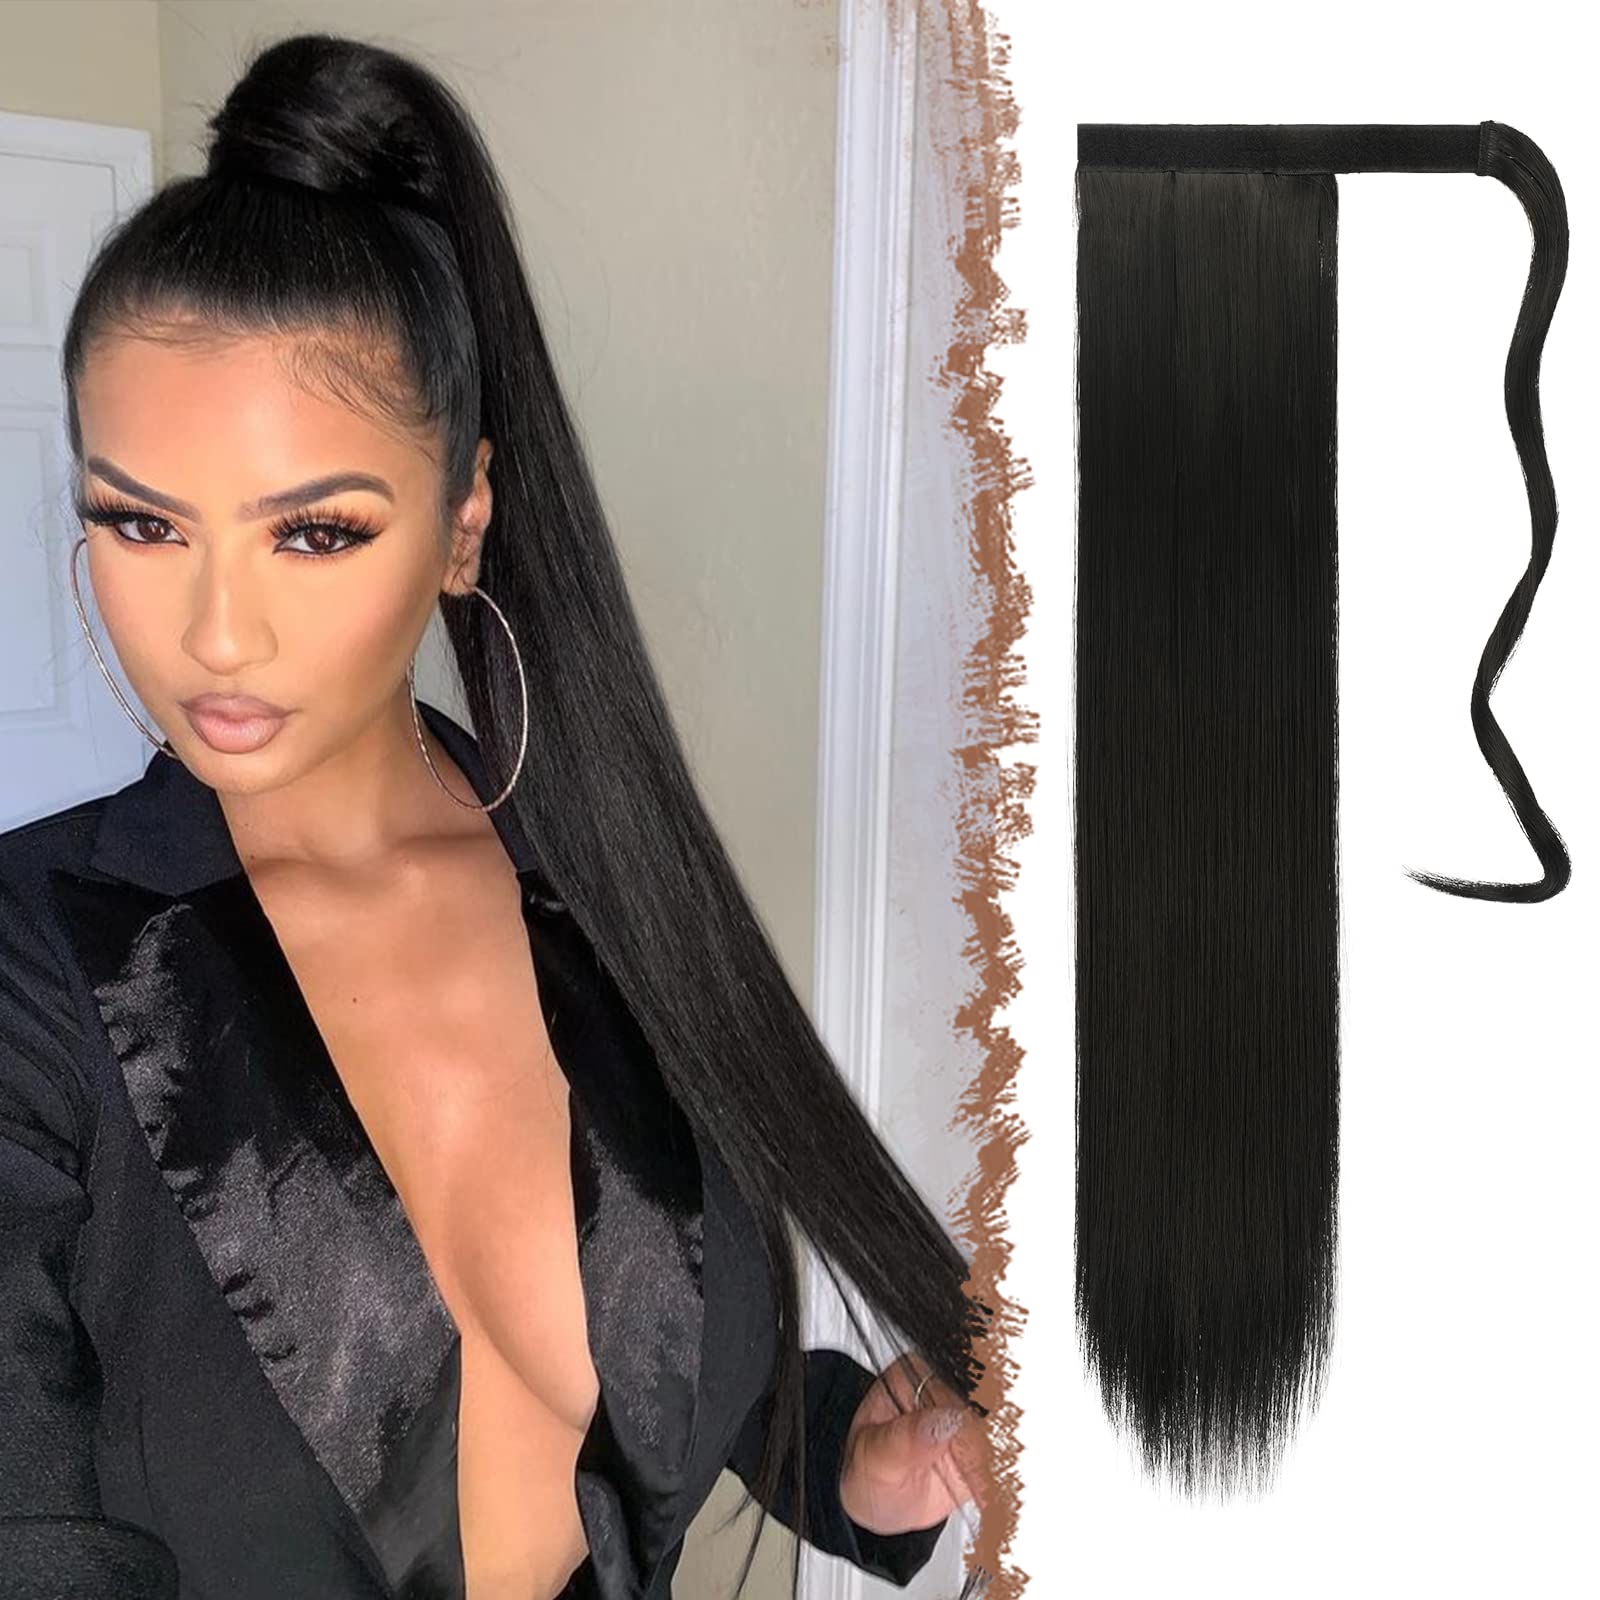 FESHFEN Long Straight Wrap Around Ponytail Extensions Synthetic